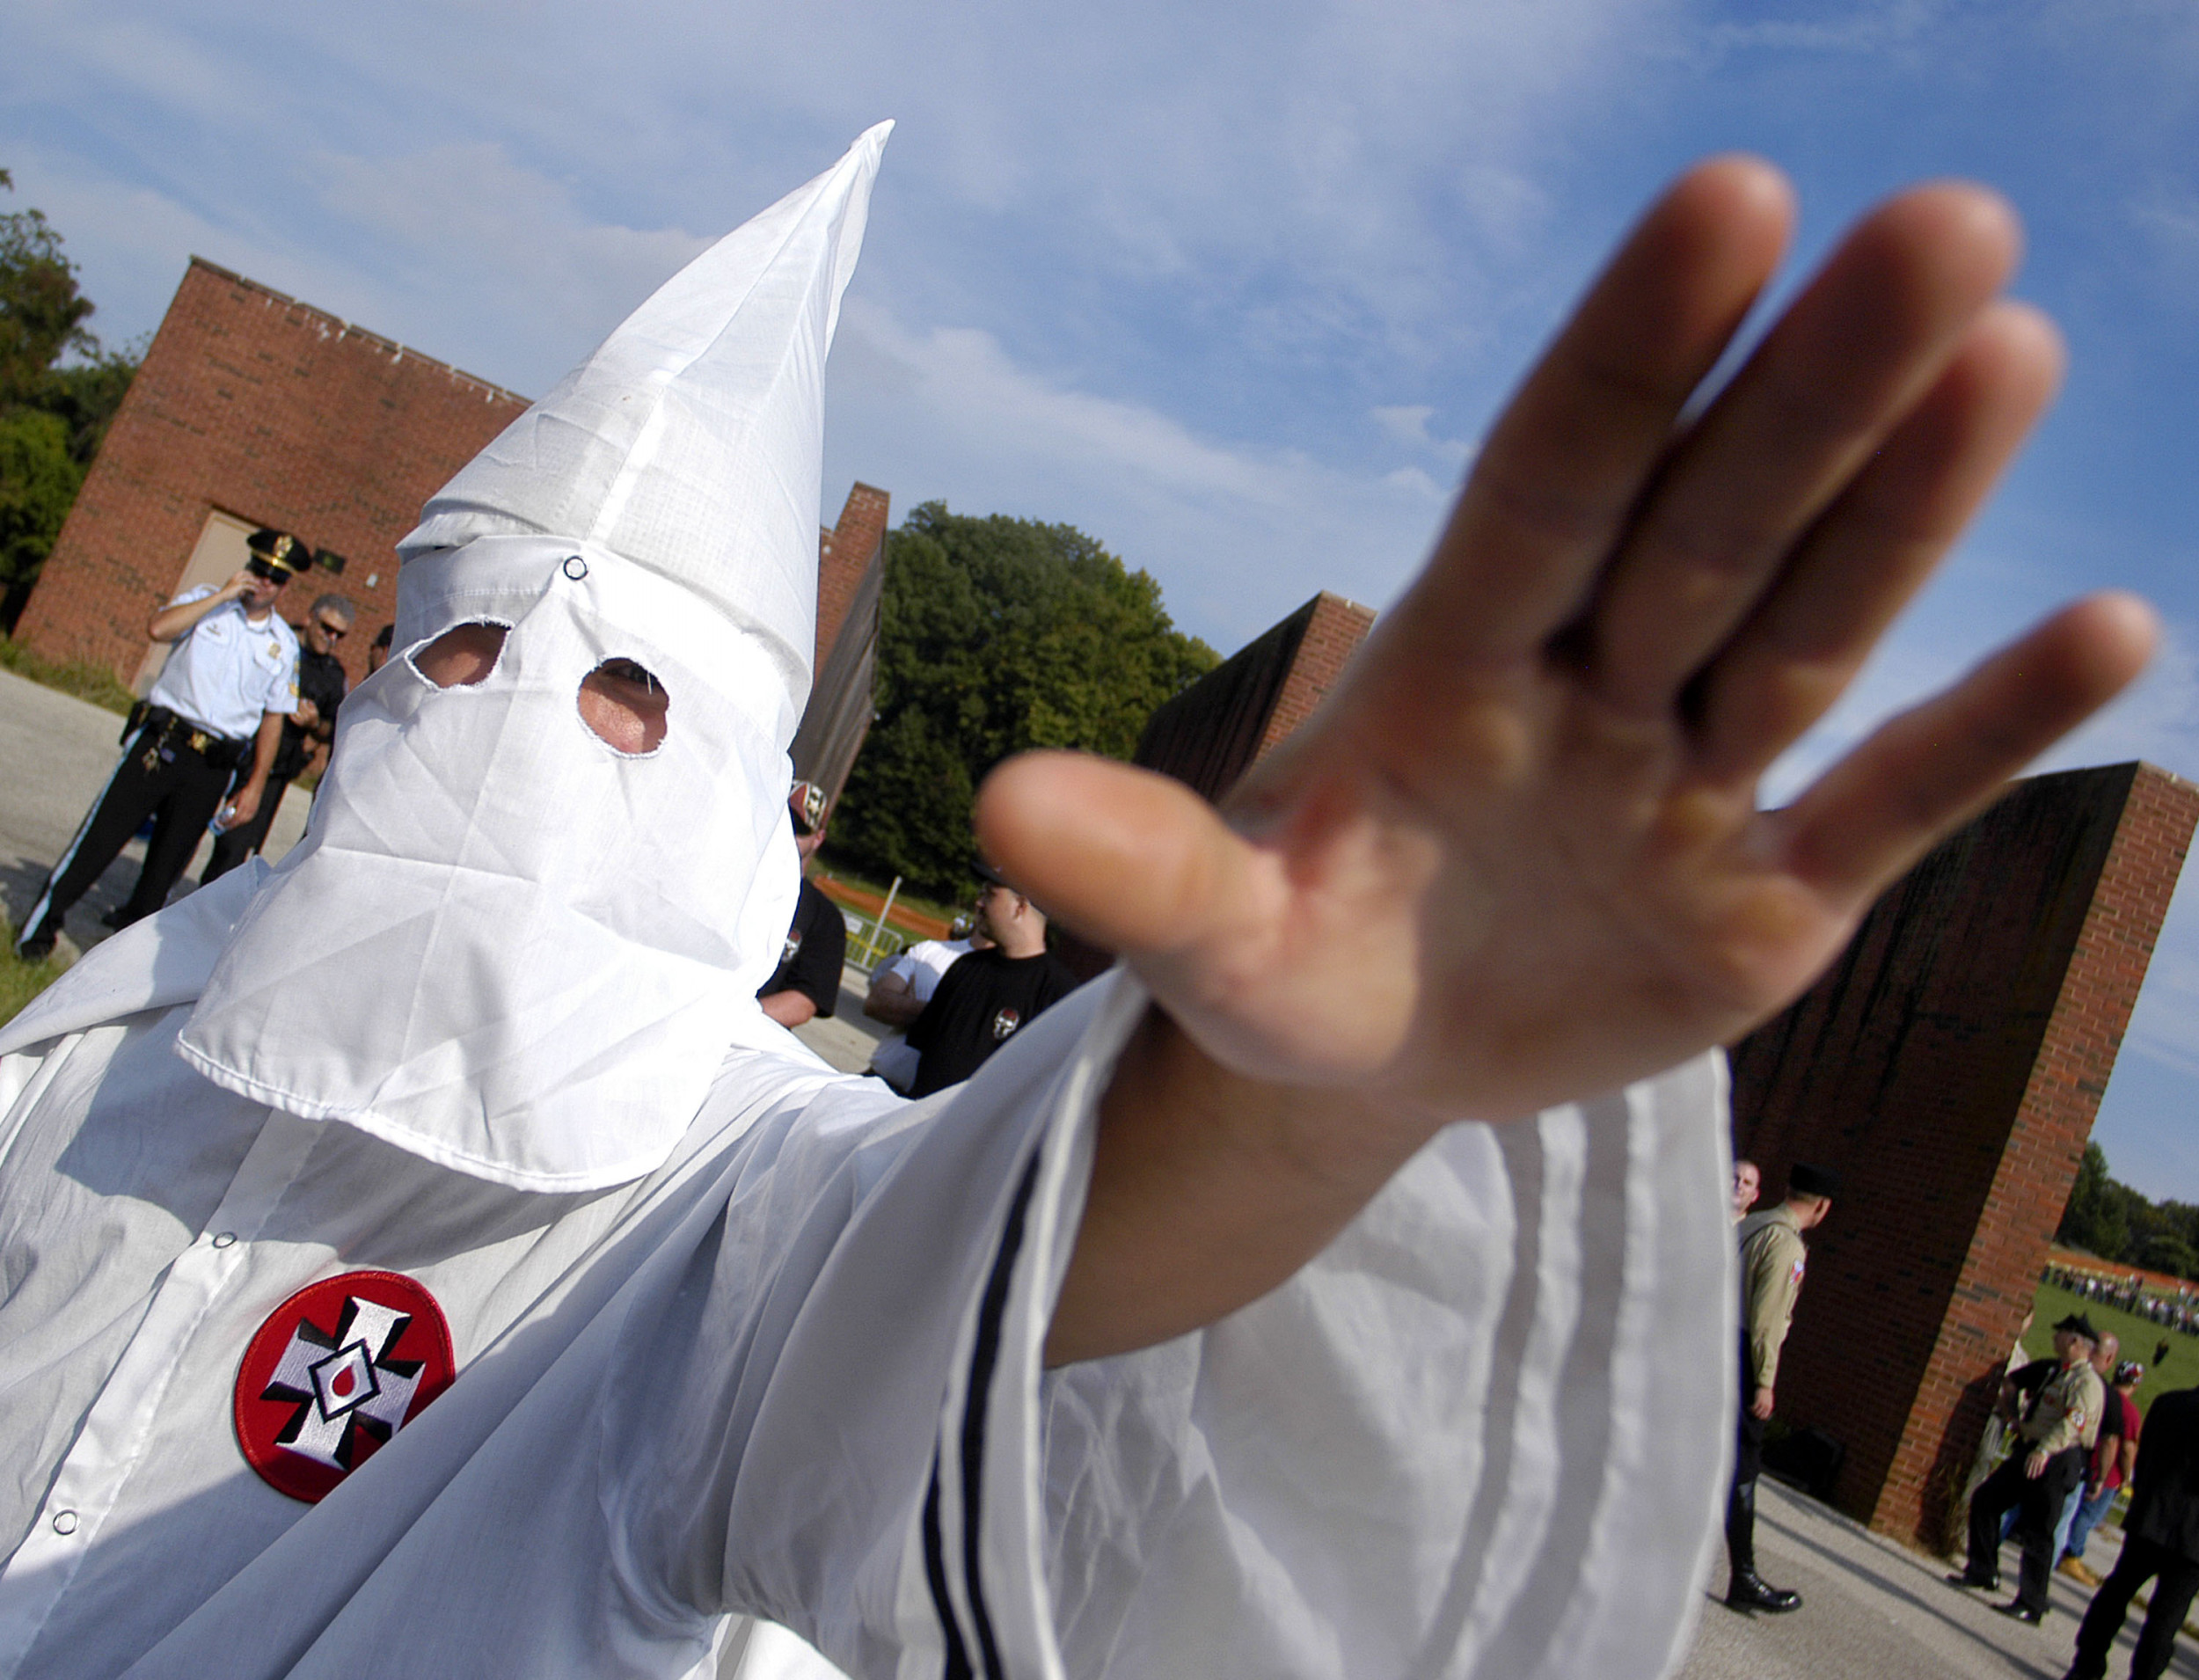 Over a Million People Sign Petition Calling For KKK to Be Declared